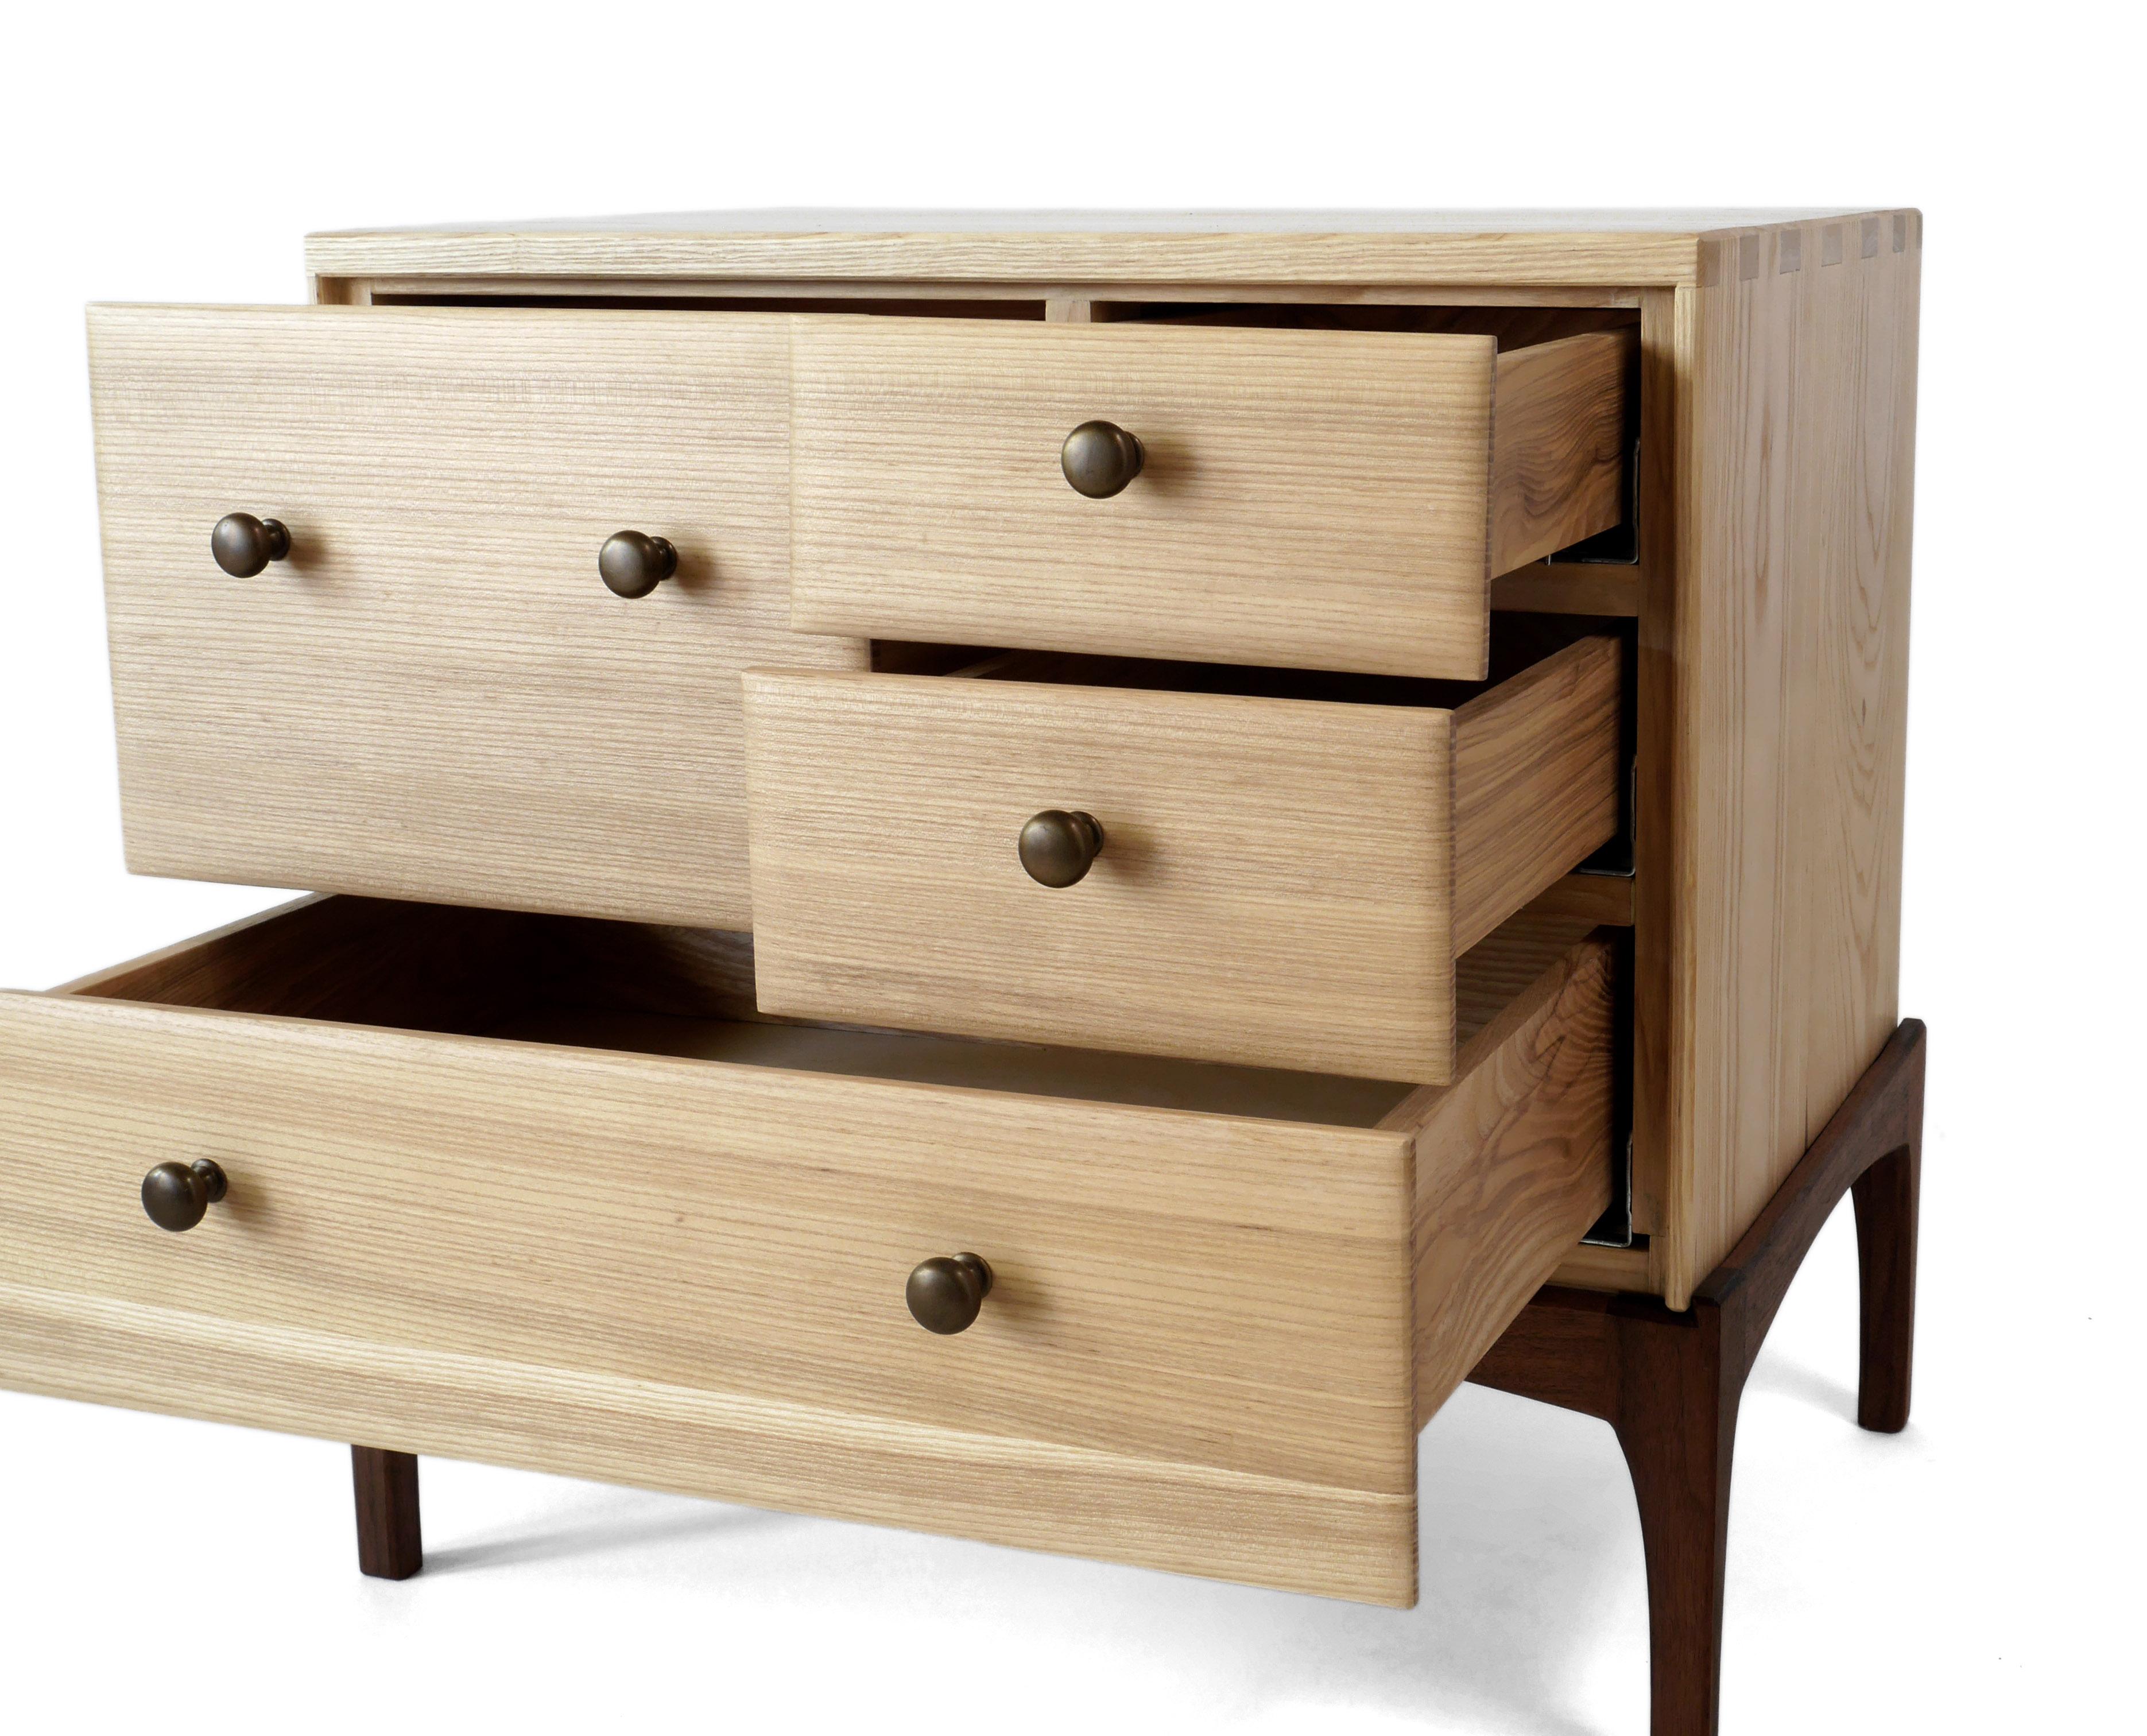 Ash Aurora Nightstand Four Drawer Modern Bedside Table/ Chest of Drawers by Arid (Moderne) im Angebot